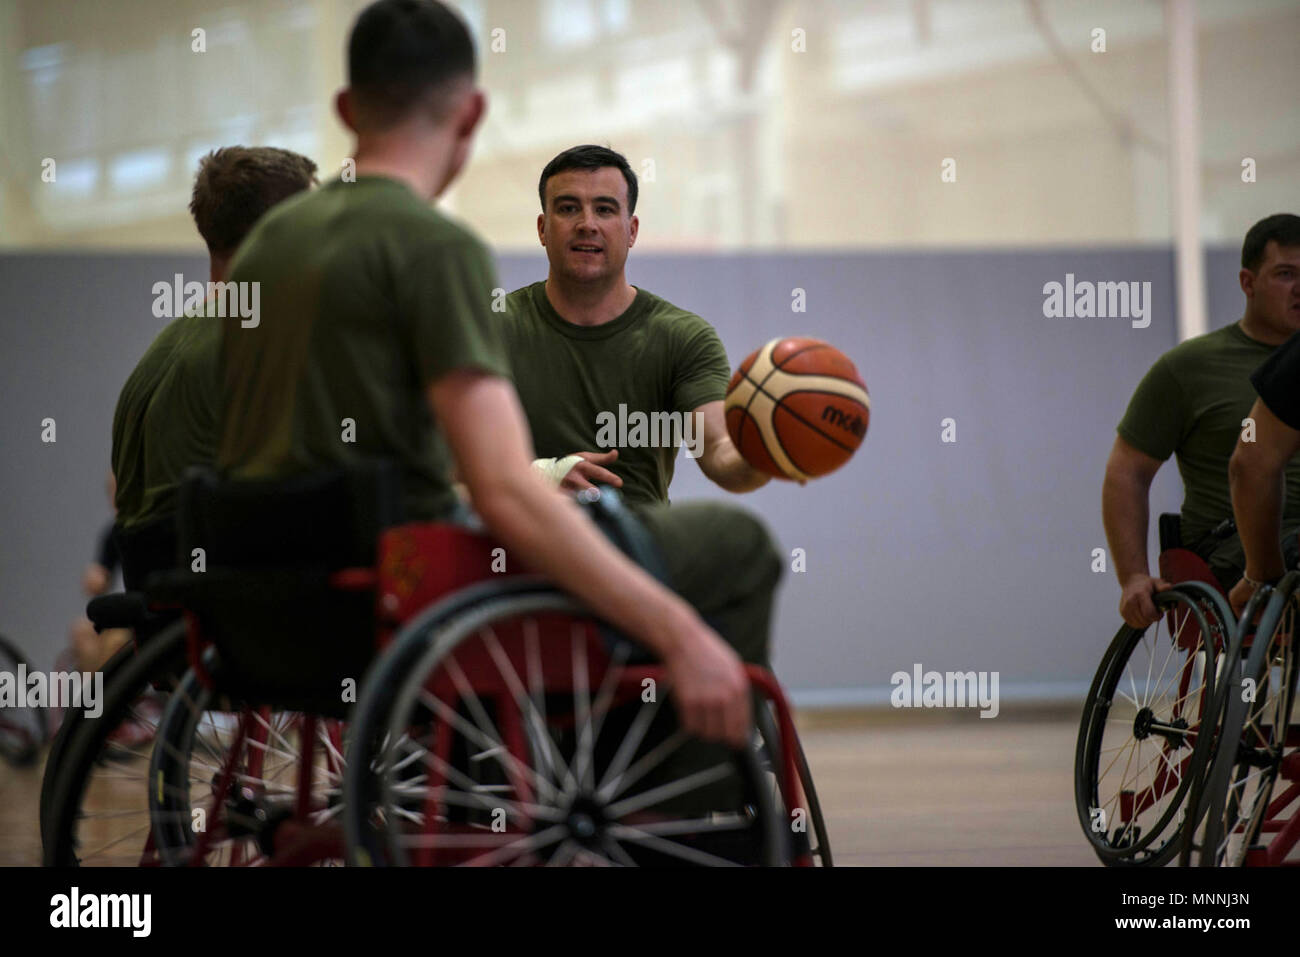 A Wounded Warrior Battalion-East Marine passes to a teammate during a 2018 Marine Corps Trials wheelchair basketball practice at Marine Corps Base Camp Lejeune, N.C., March 15, 2018. The Marine Corps Trials promotes recovery and rehabilitation through adaptive sport participation and develops camaraderie among recovering service members (RSMs) and veterans. It is an opportunity for RSMs to demonstrate their achievements and serves as the primary venue to select Marine Corps participants for the DoD Warrior Games. Stock Photo